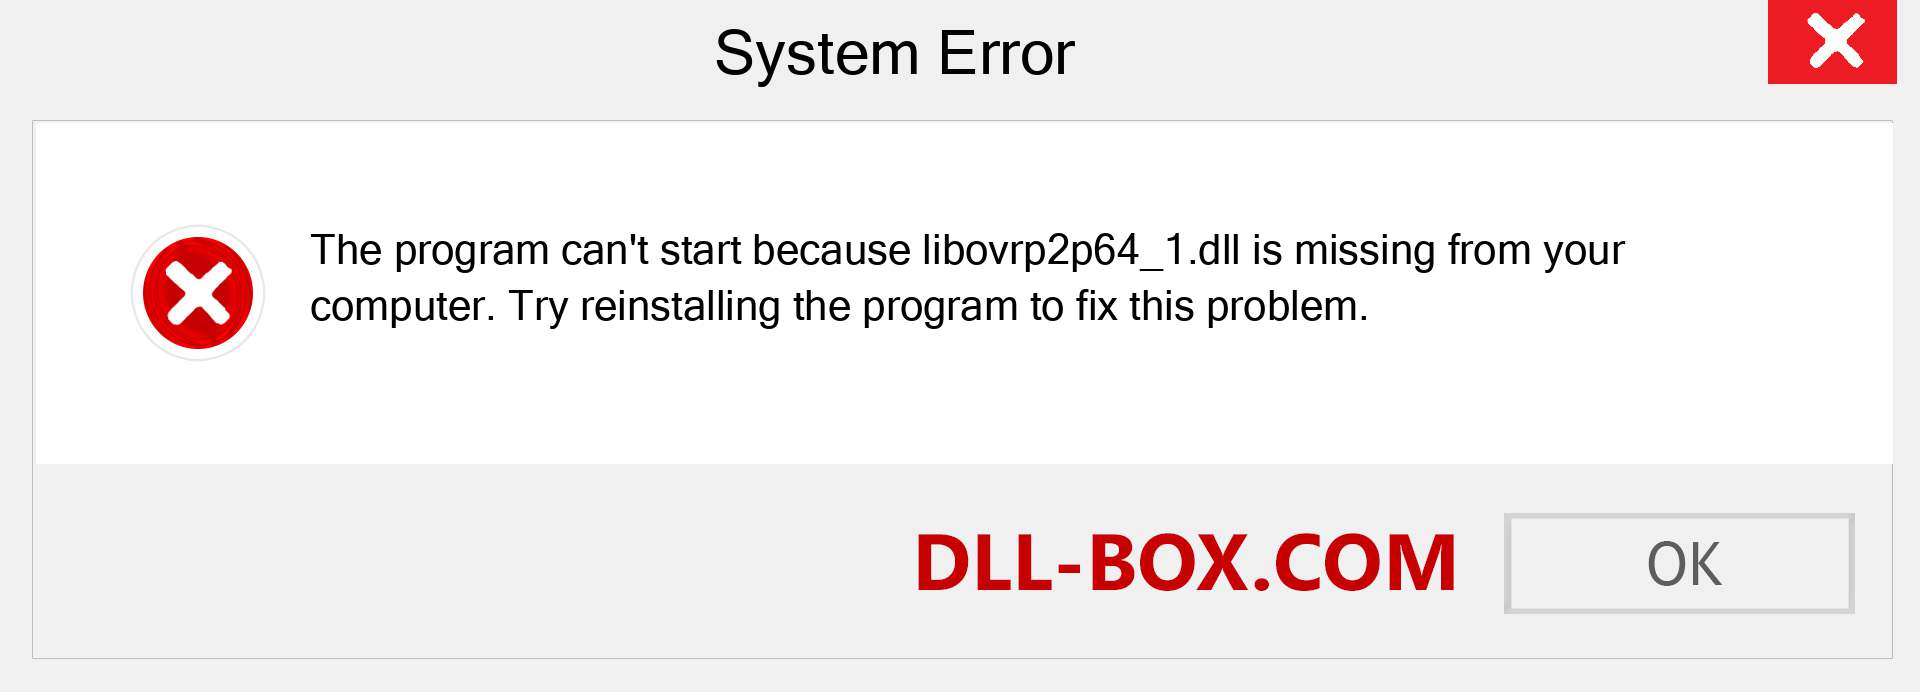  libovrp2p64_1.dll file is missing?. Download for Windows 7, 8, 10 - Fix  libovrp2p64_1 dll Missing Error on Windows, photos, images